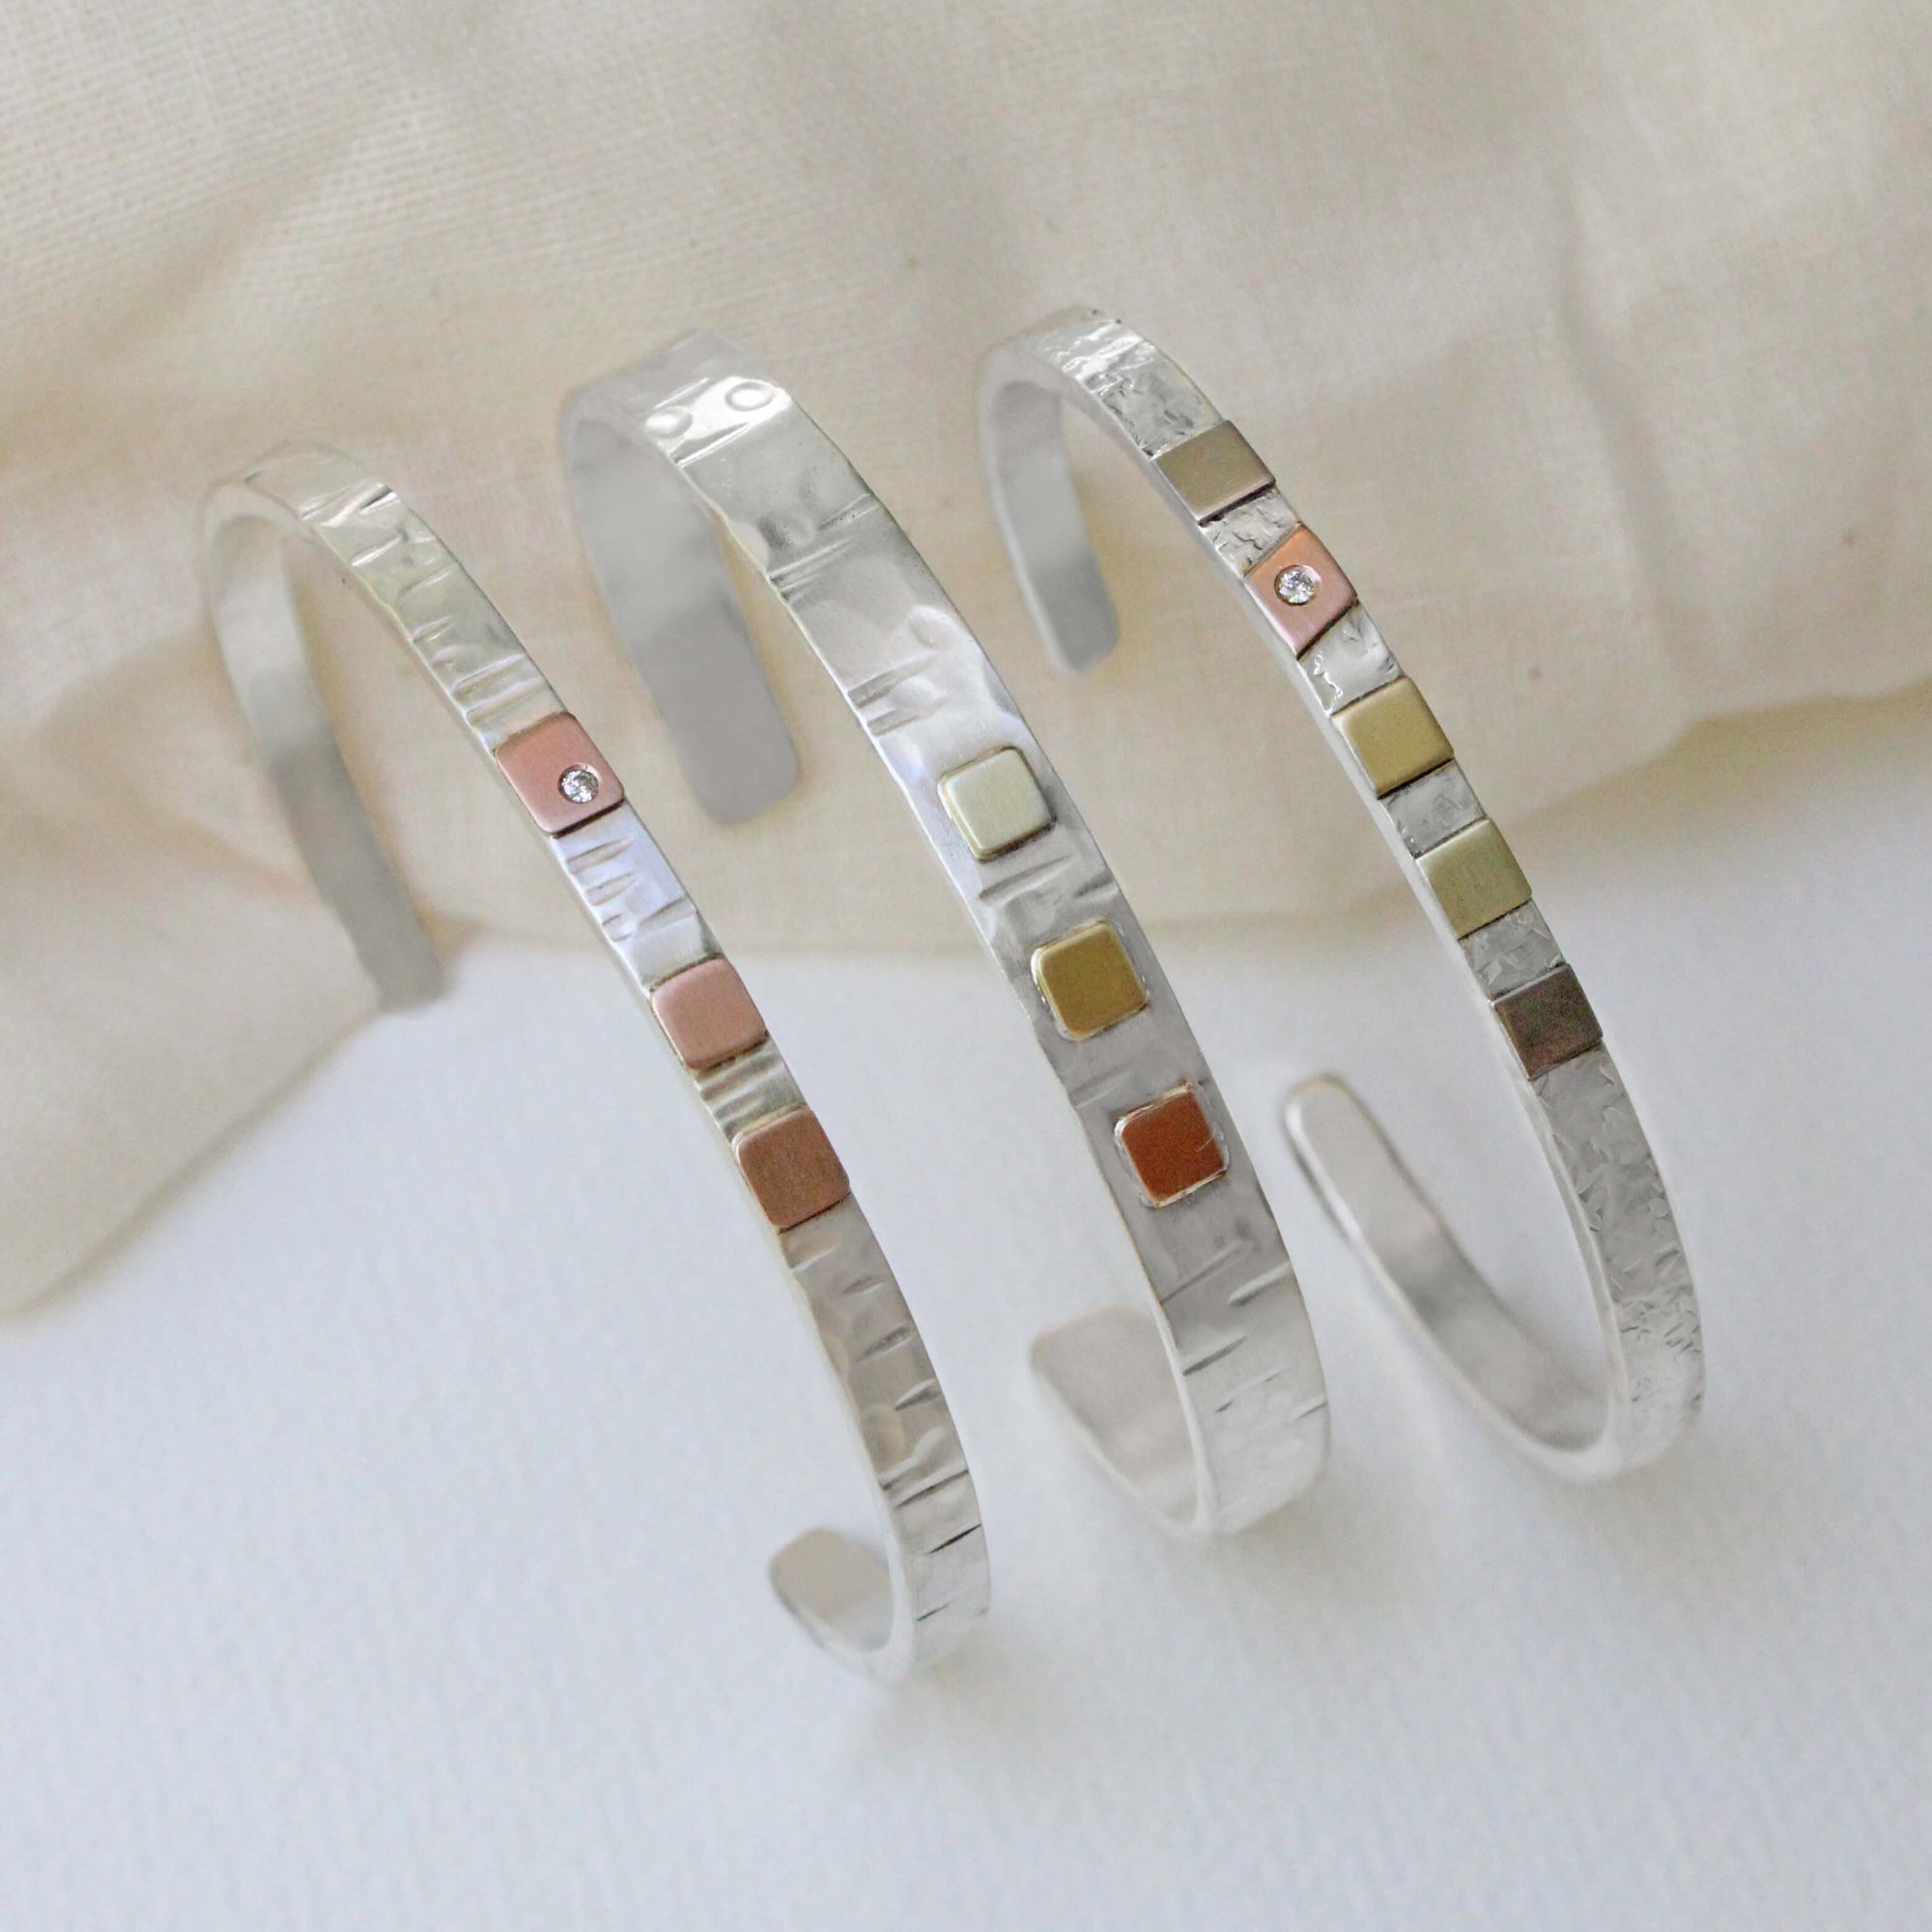 Sterling silver and mixed gold cuff bracelets from EC Design Jewelry in Minneapolis, MN. Handmade with recycled metal.